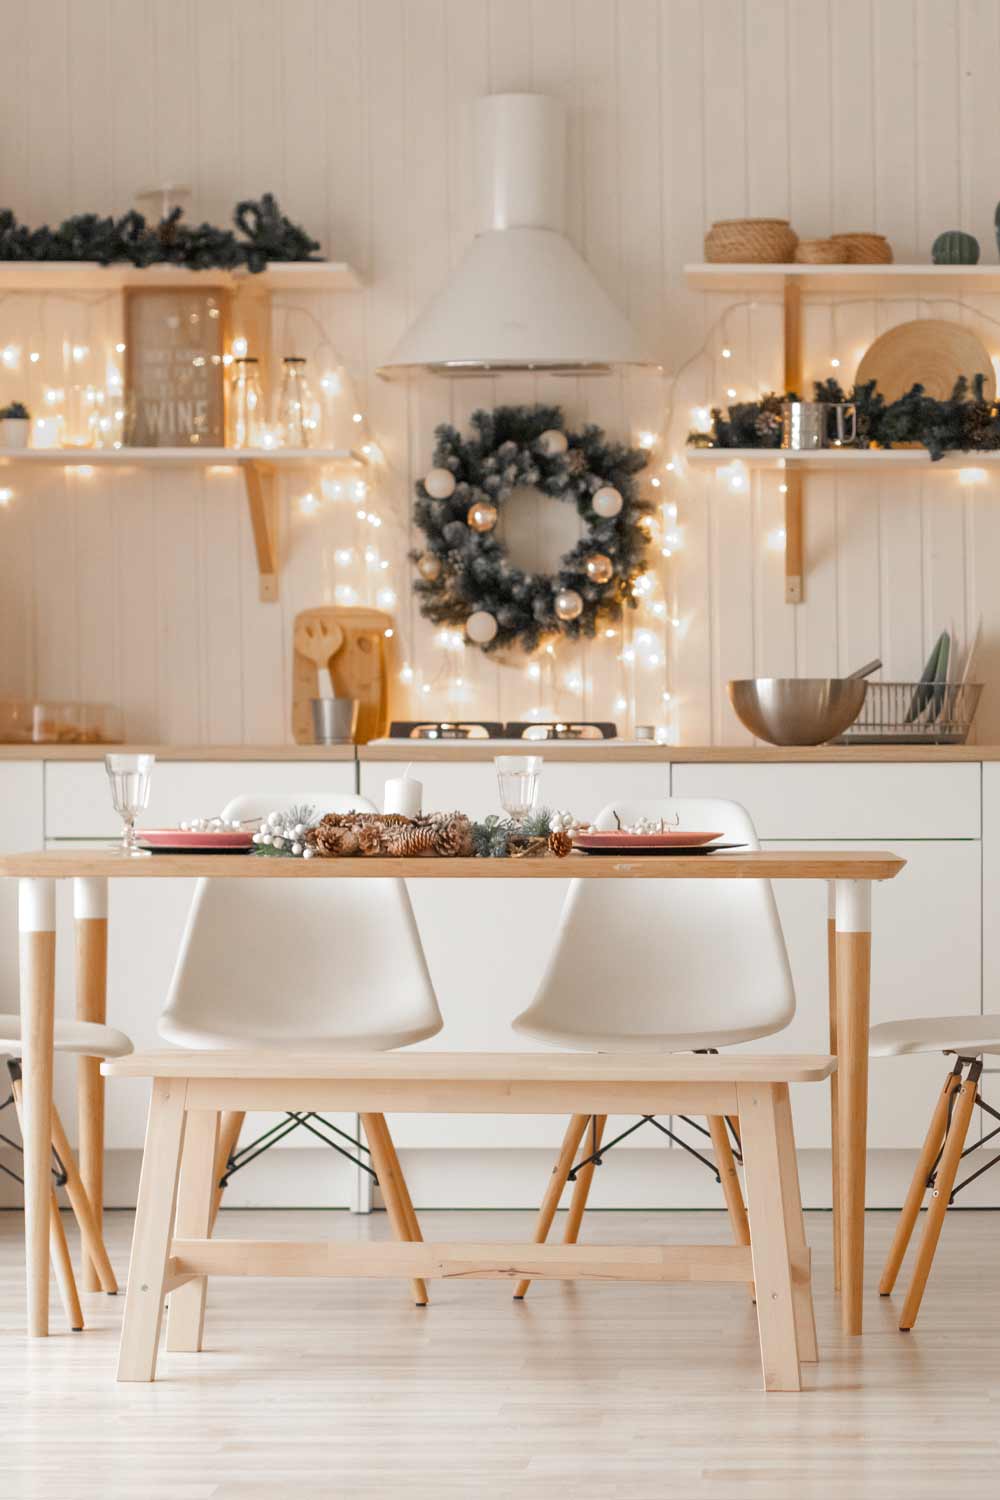 Kitchen Decoration with Christmas Lights 